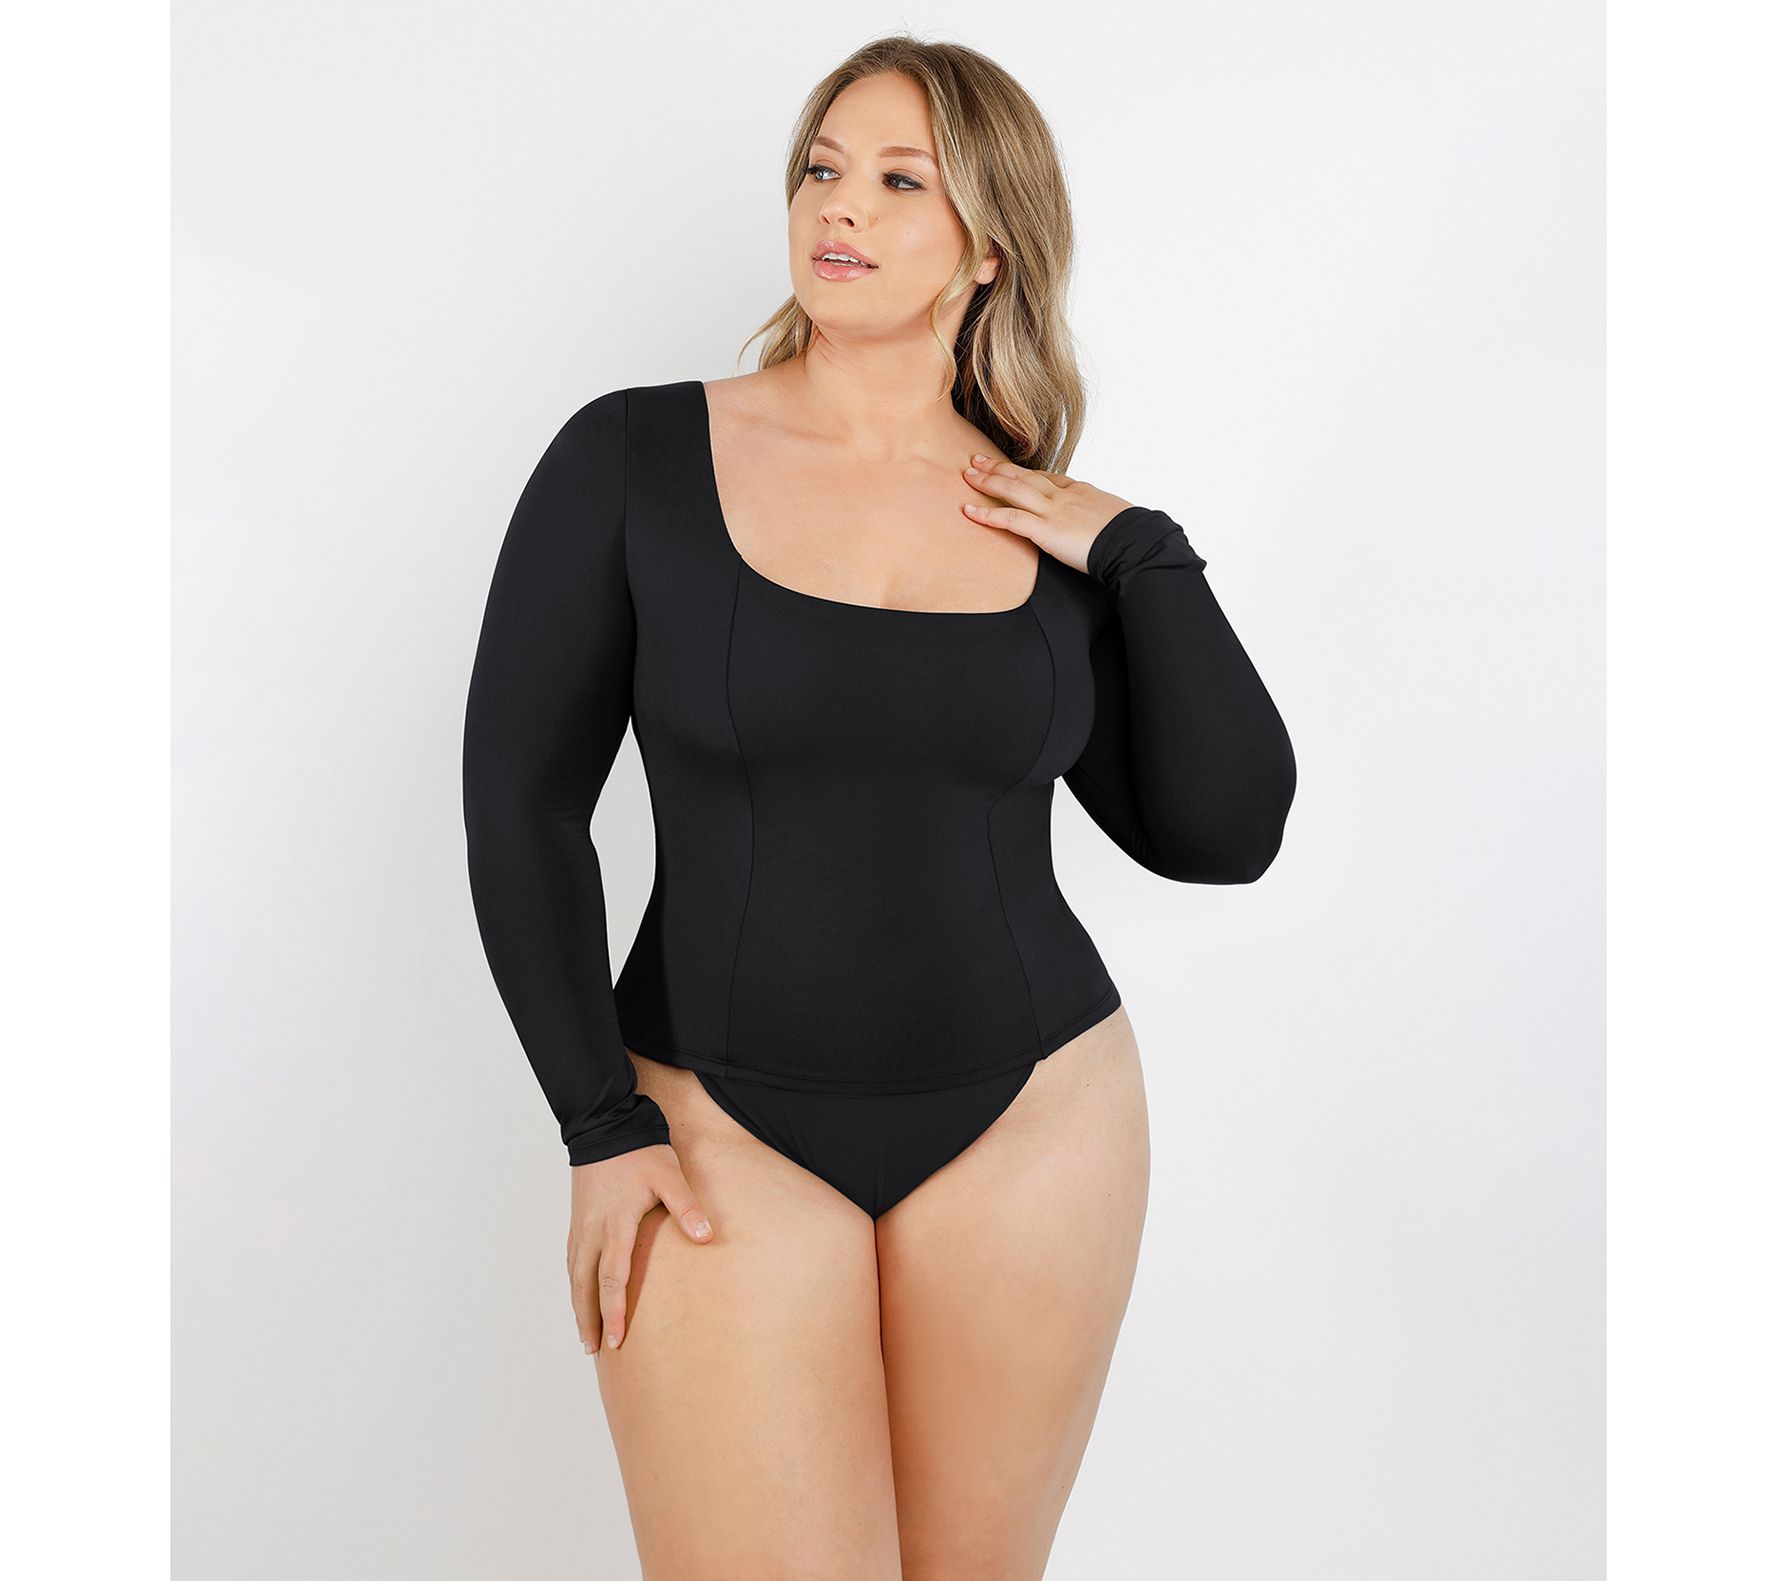 Get Ready For The Holidays With The Shapellx Collection of Body-Shaping  Bodysuits